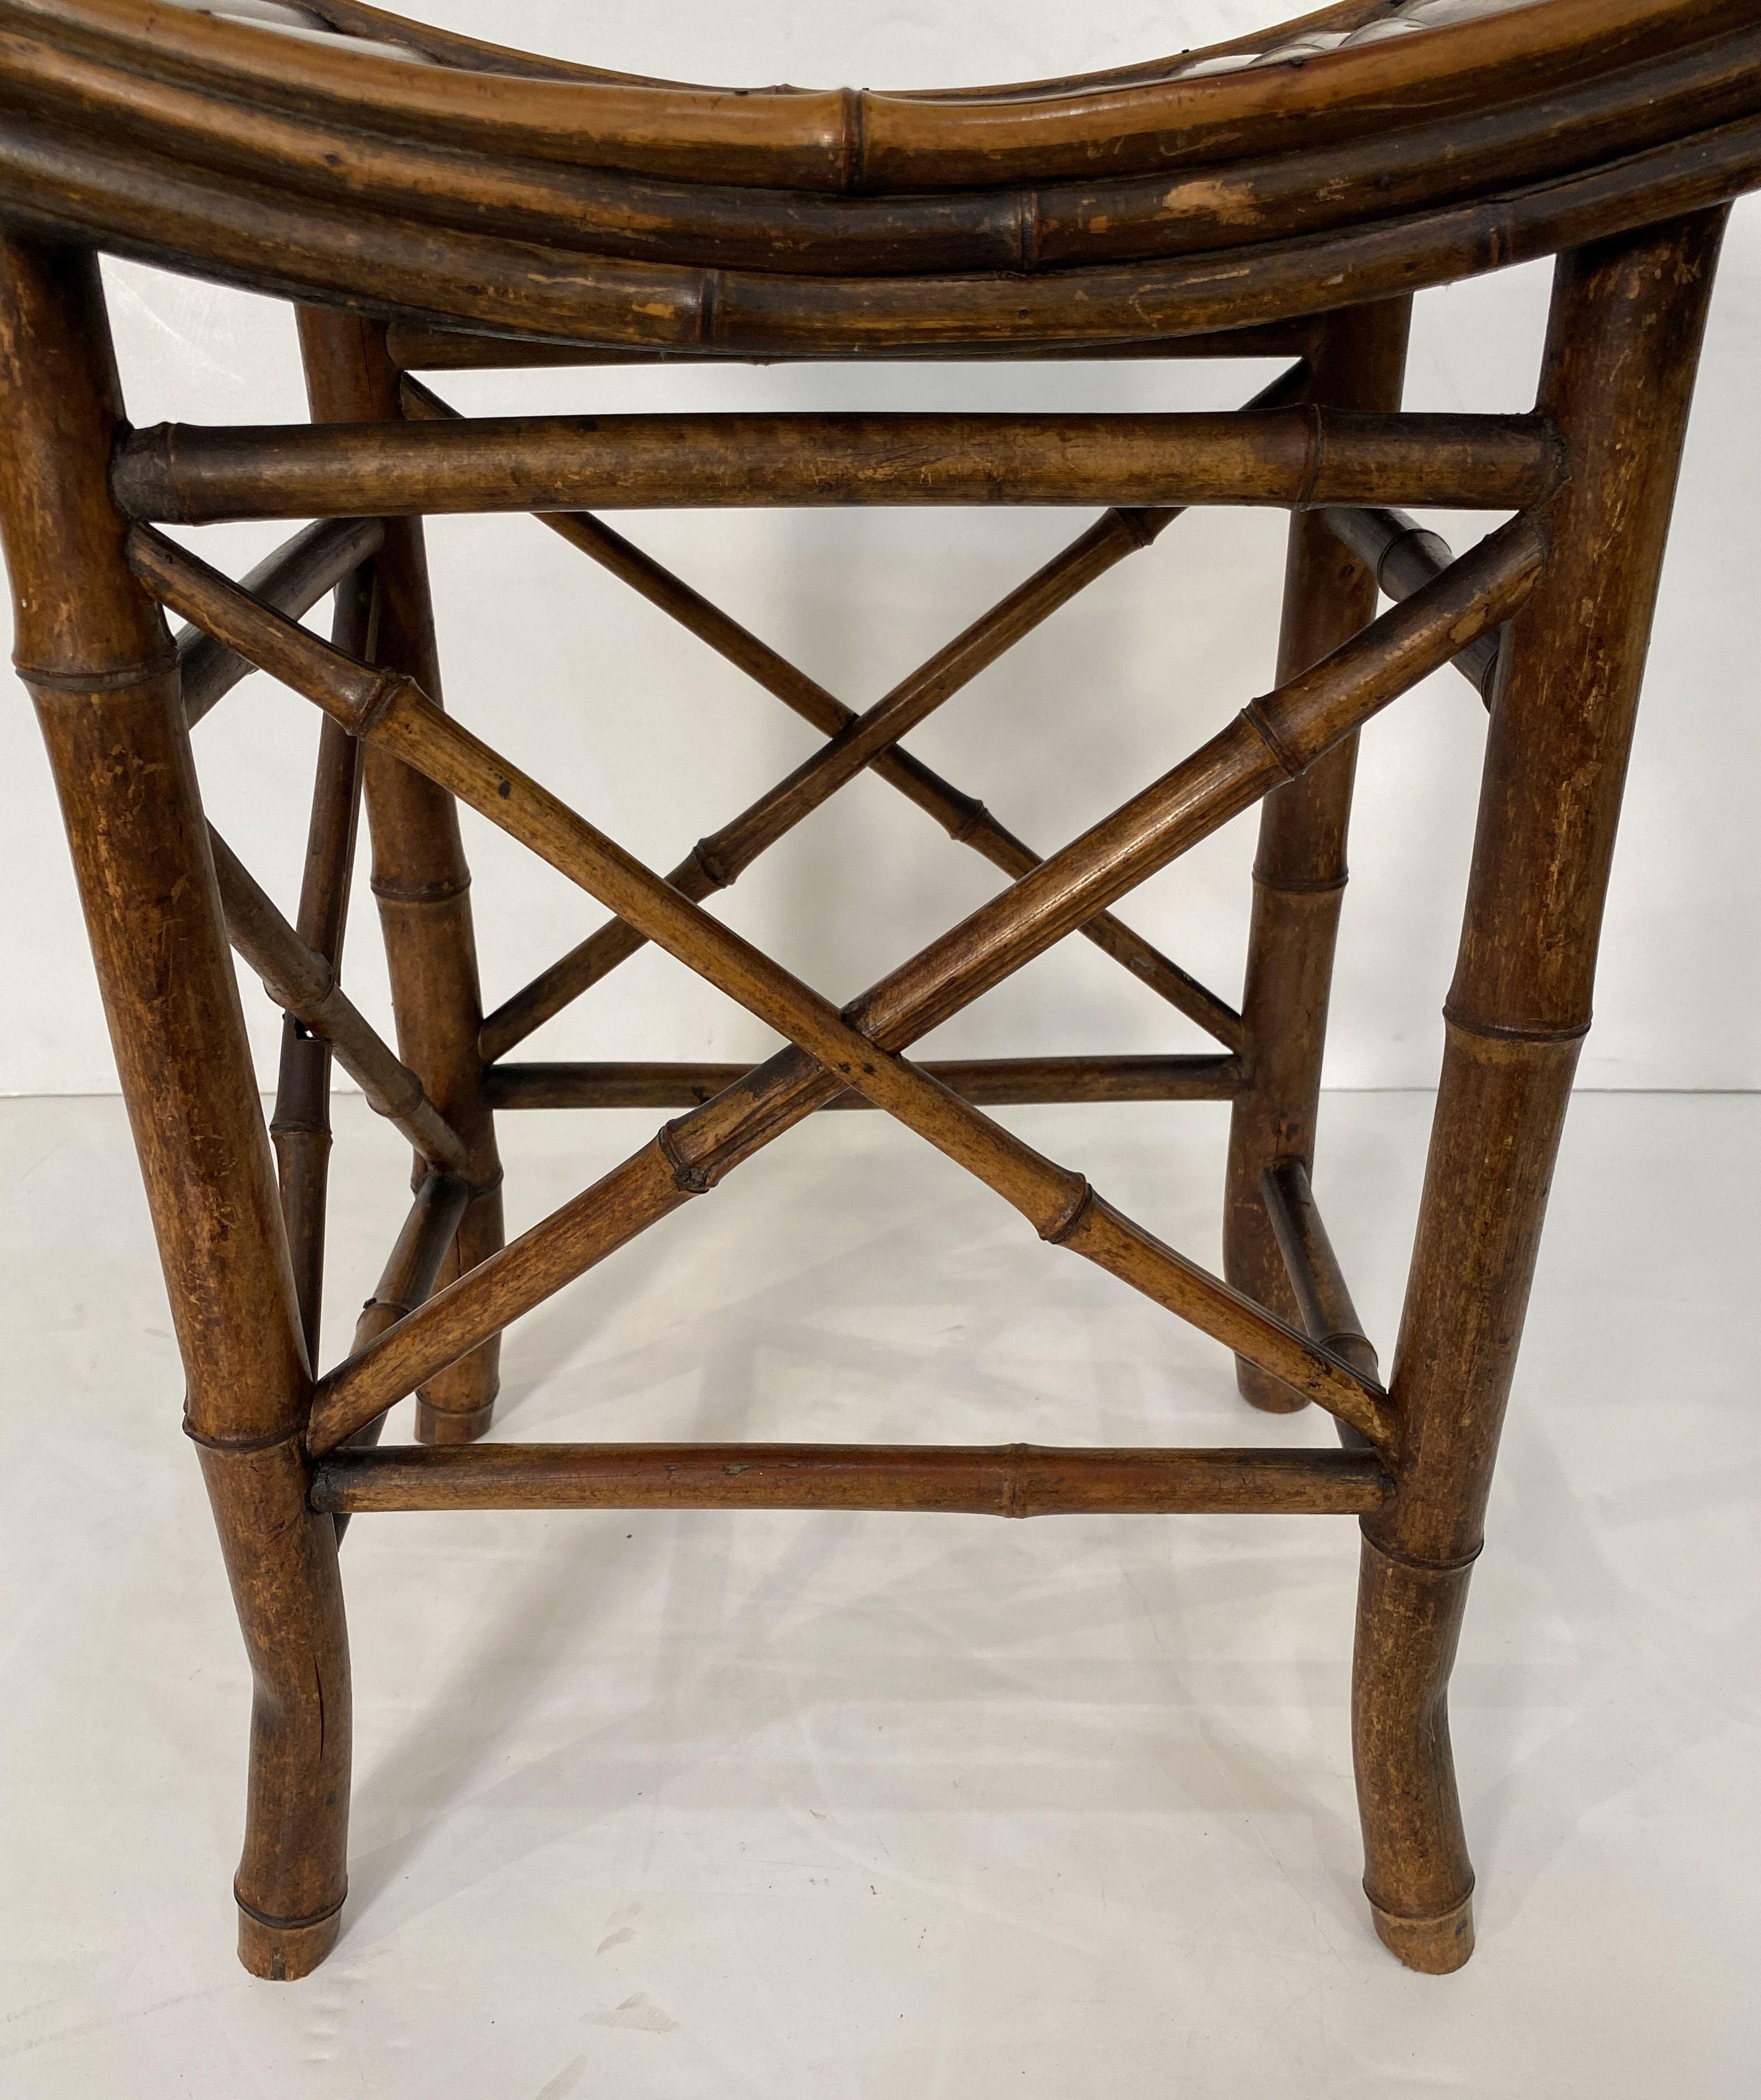 English Bamboo Bench or Stool with Saddle Seat from the Aesthetic Movement Era For Sale 15